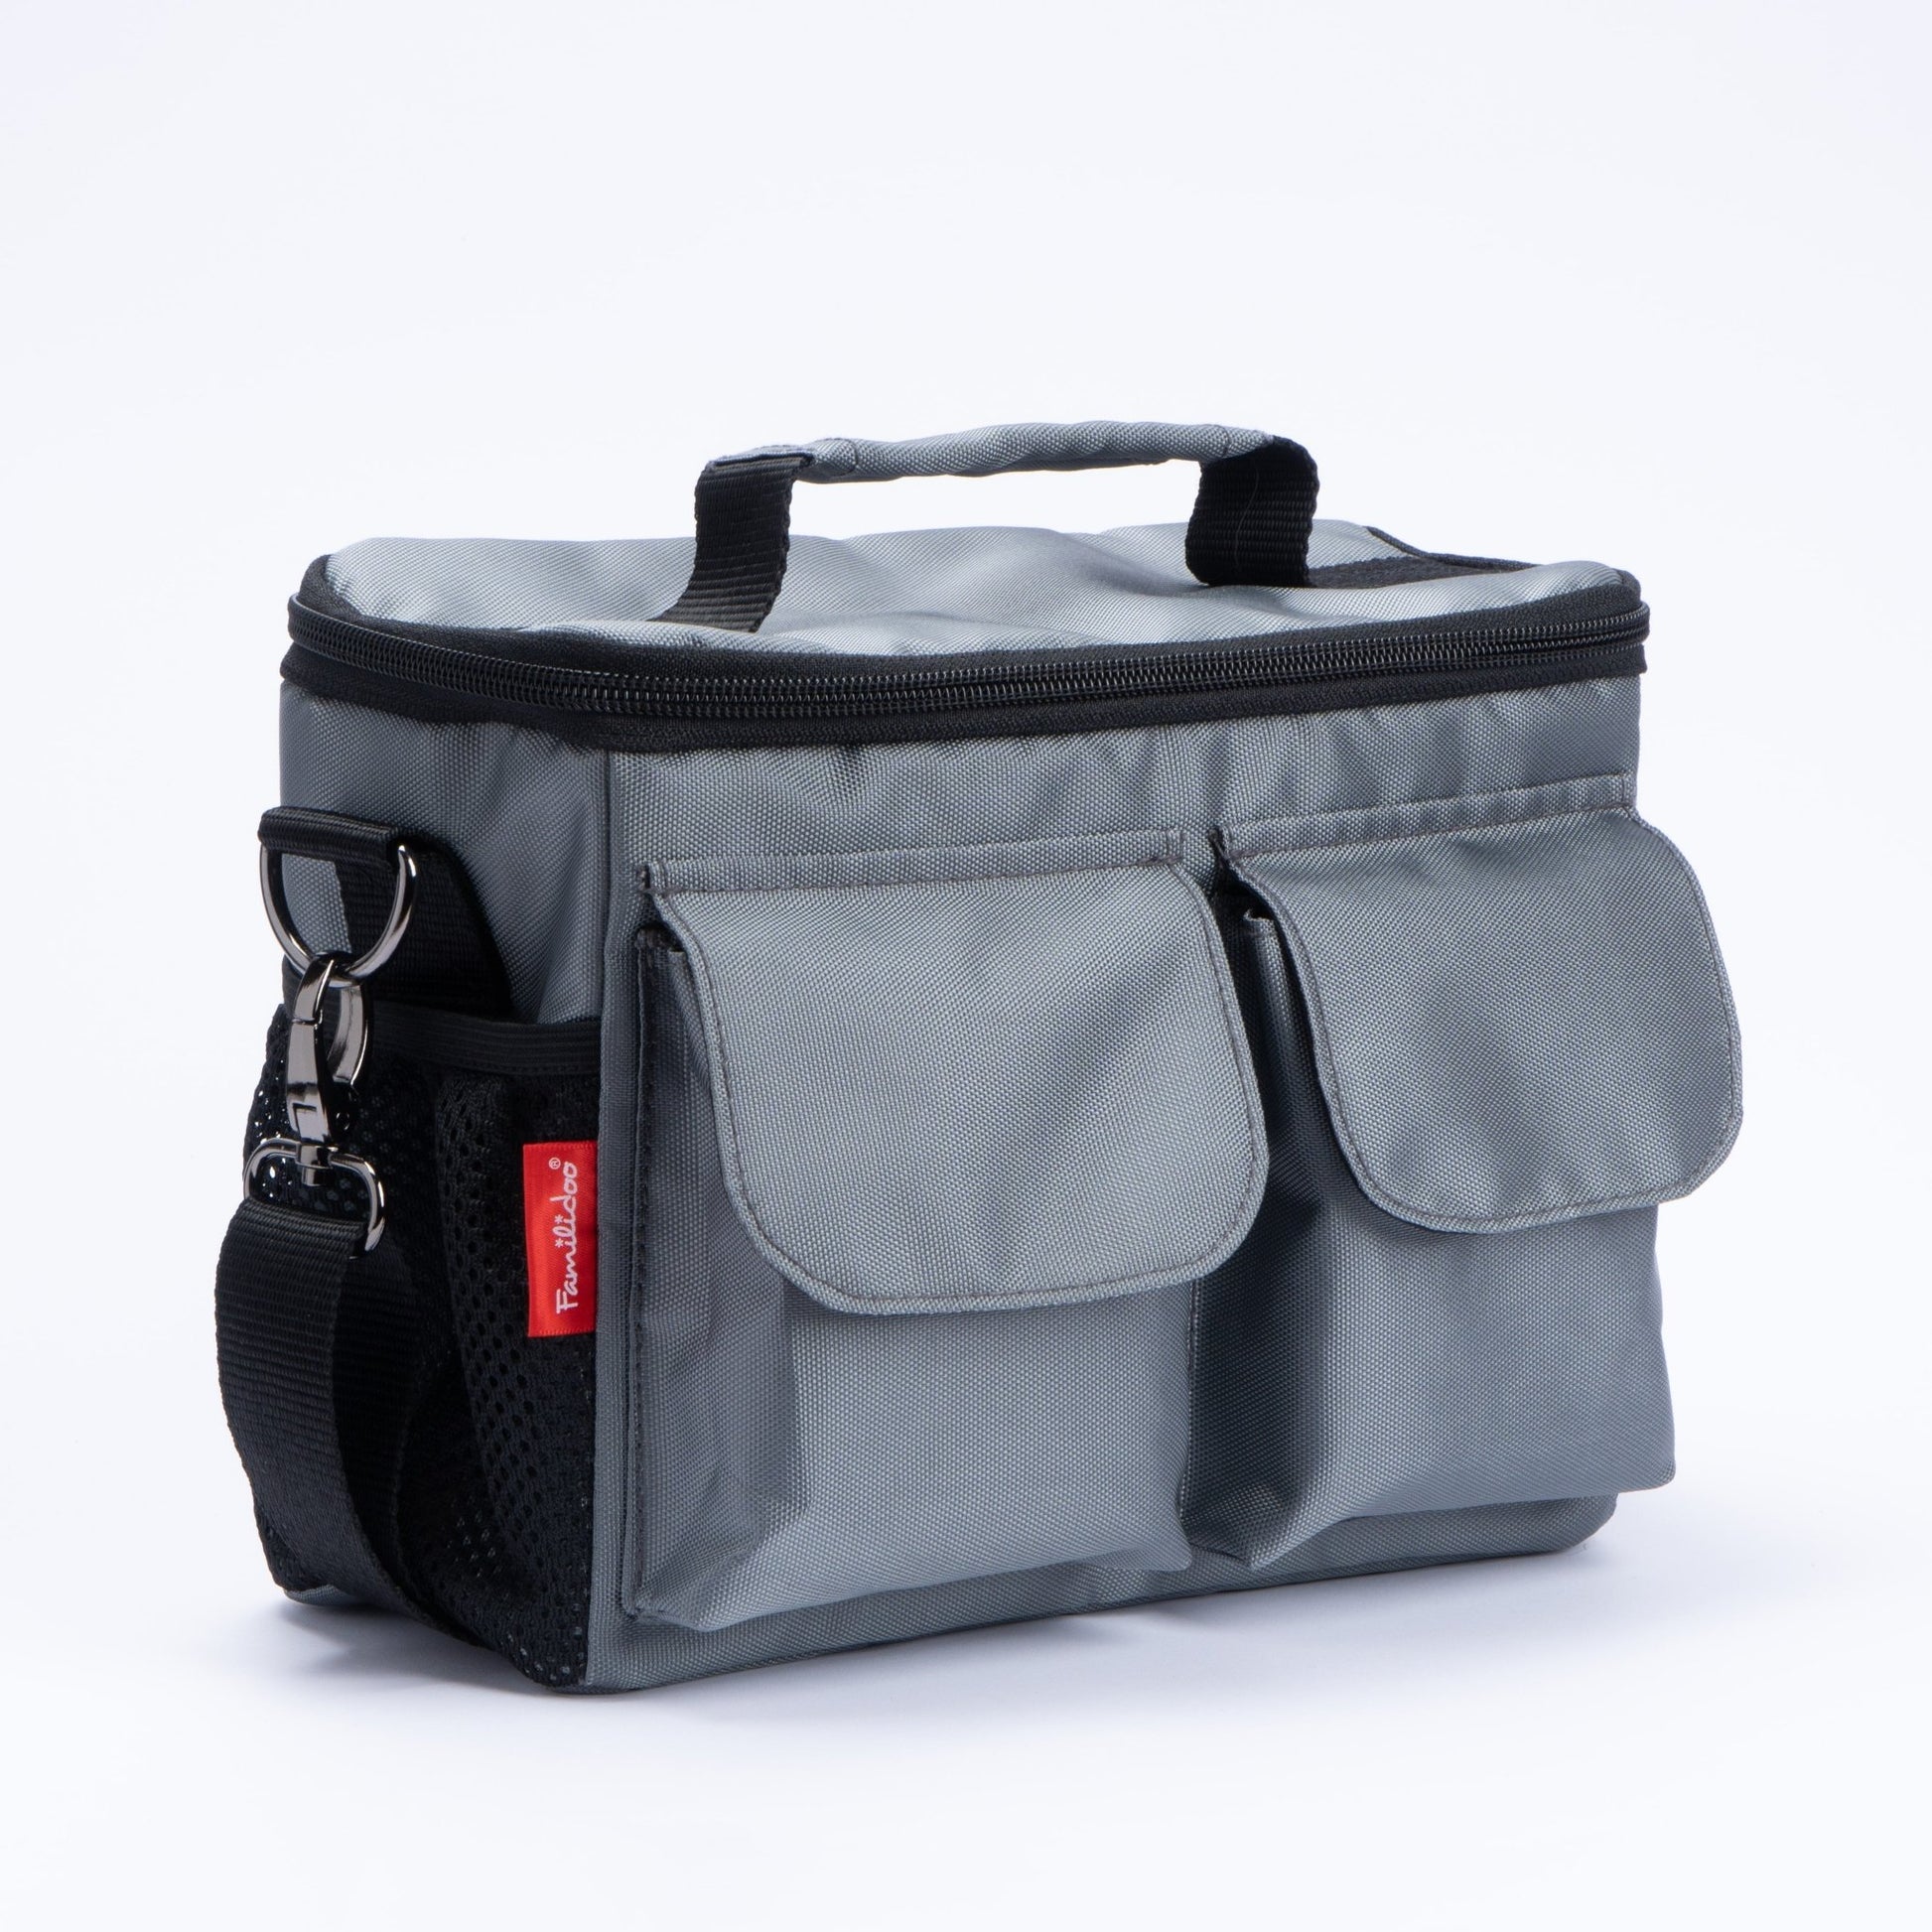 Insulated Thermal BagInsulated Thermal Bag